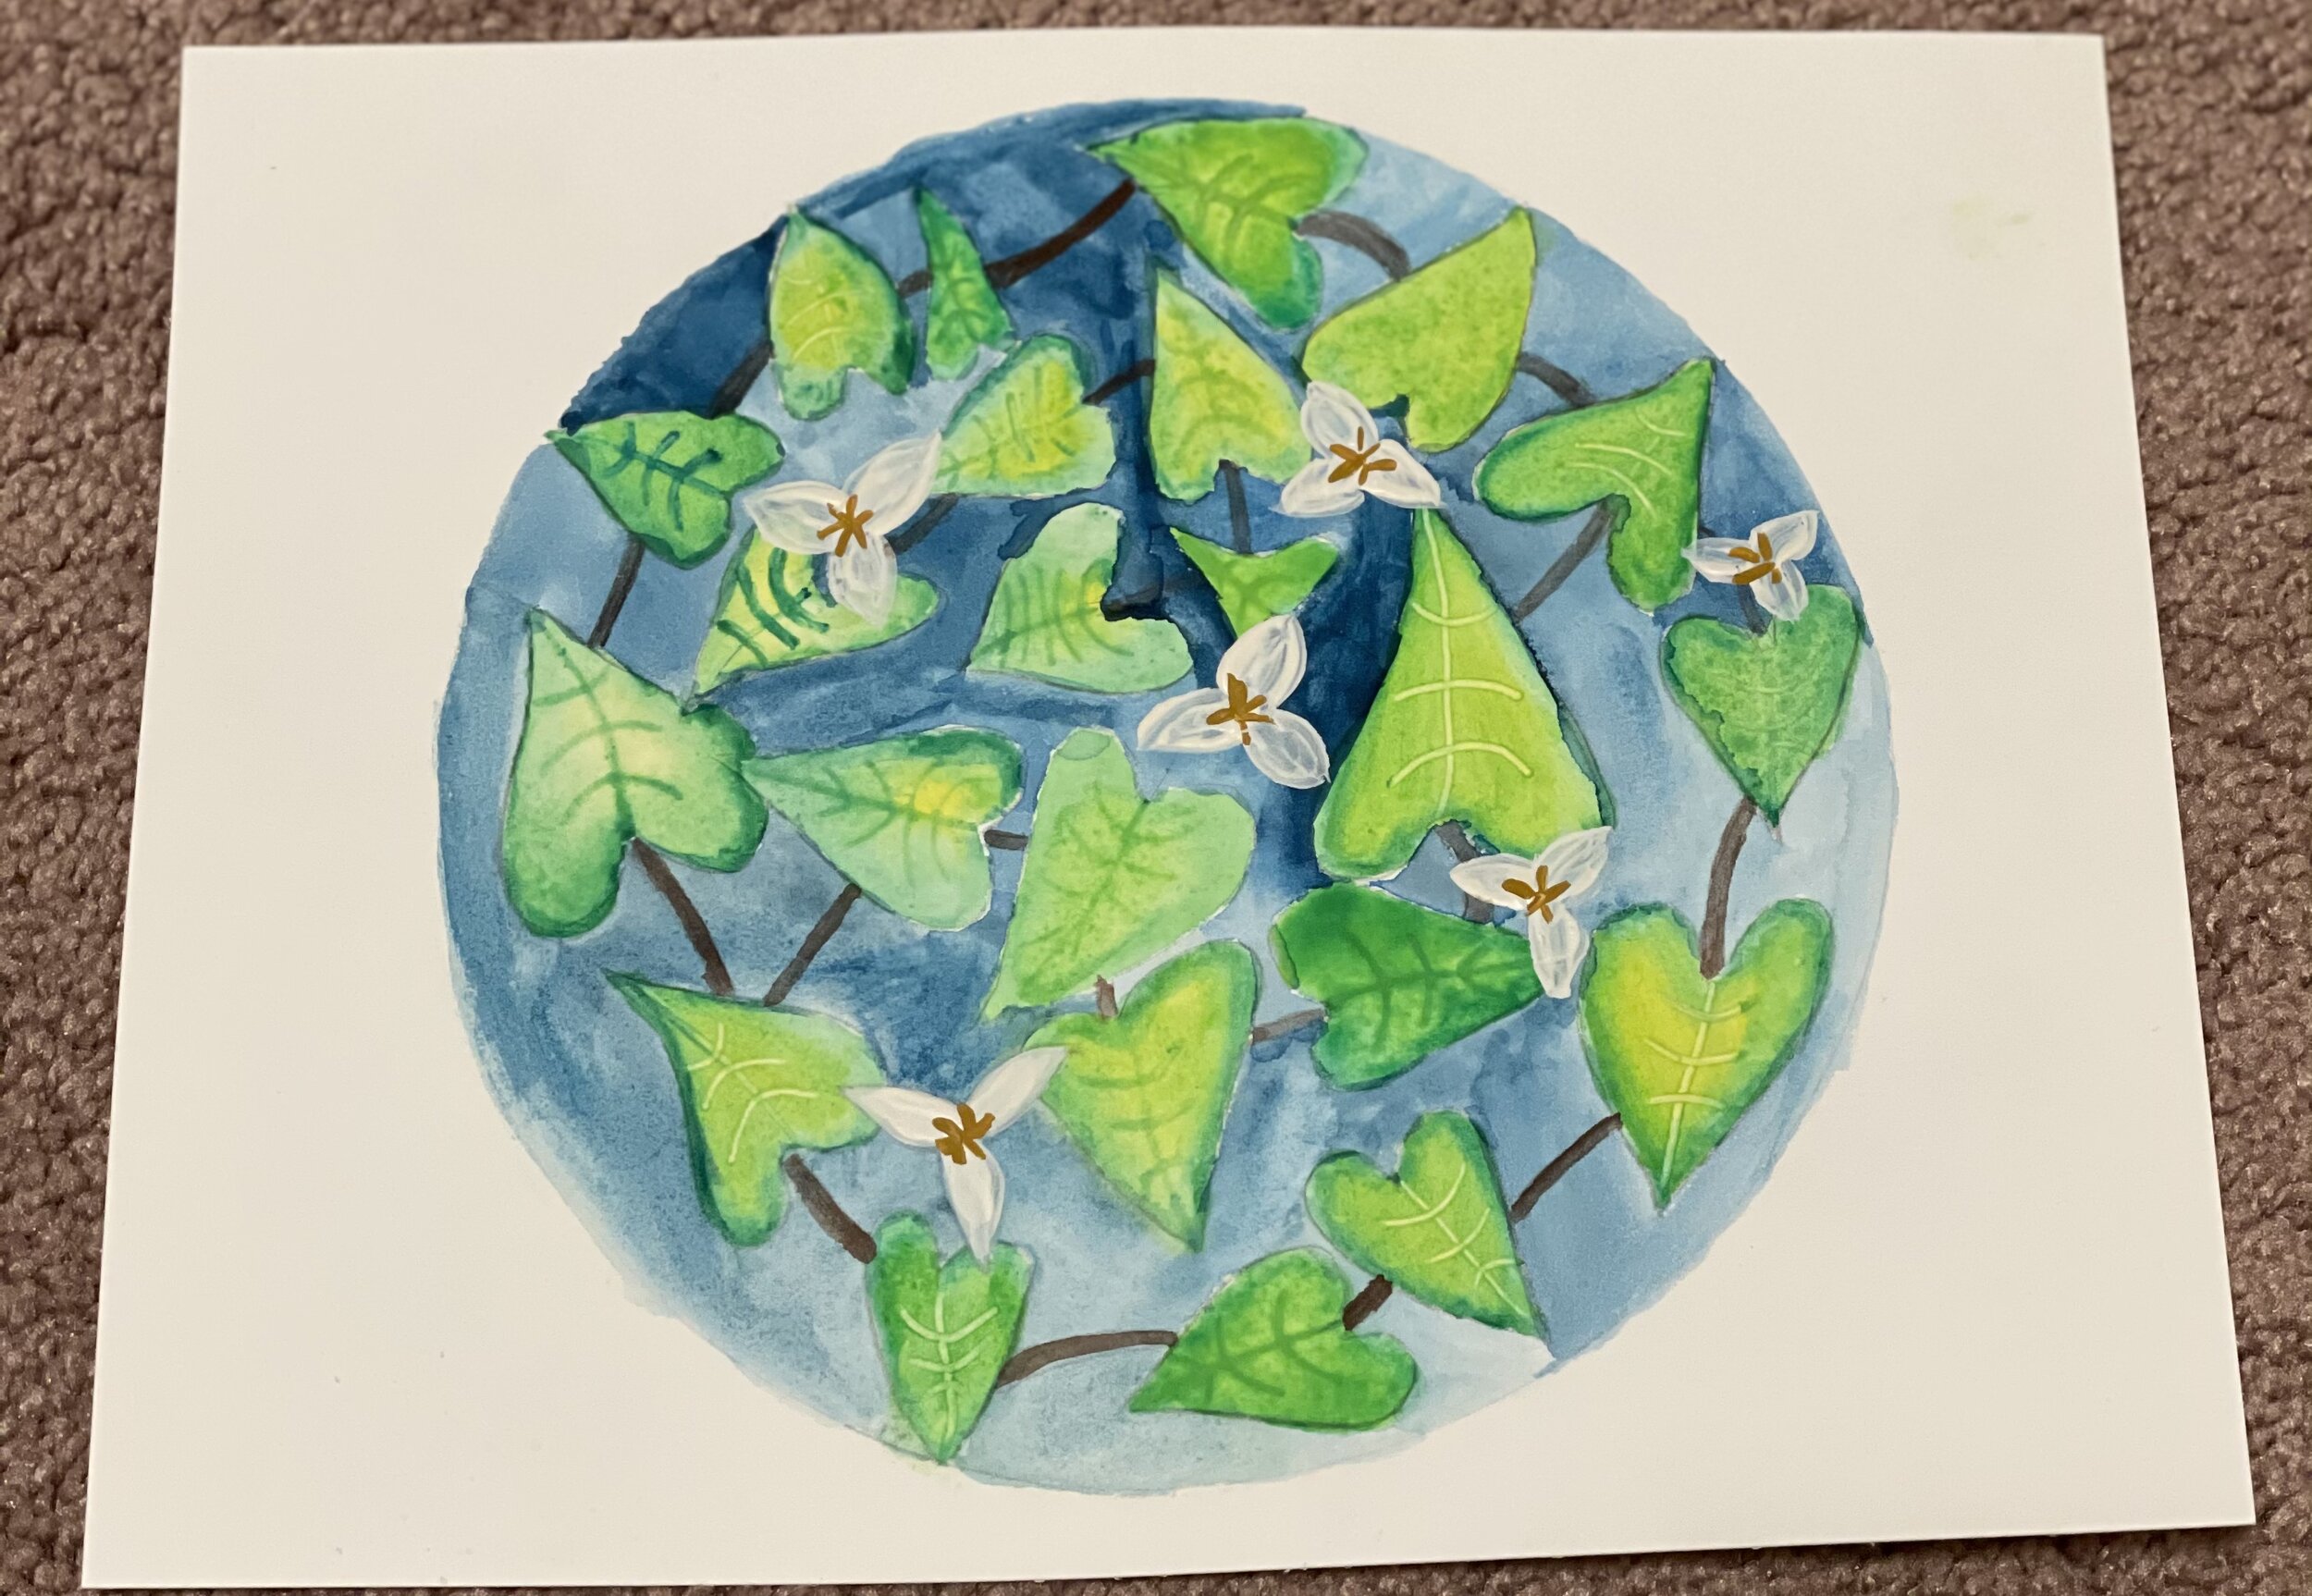 Show love to earth with Trillium Ovatum by Vaaruni Bhargava - 2nd Place and People's Choice - Grades 3-5